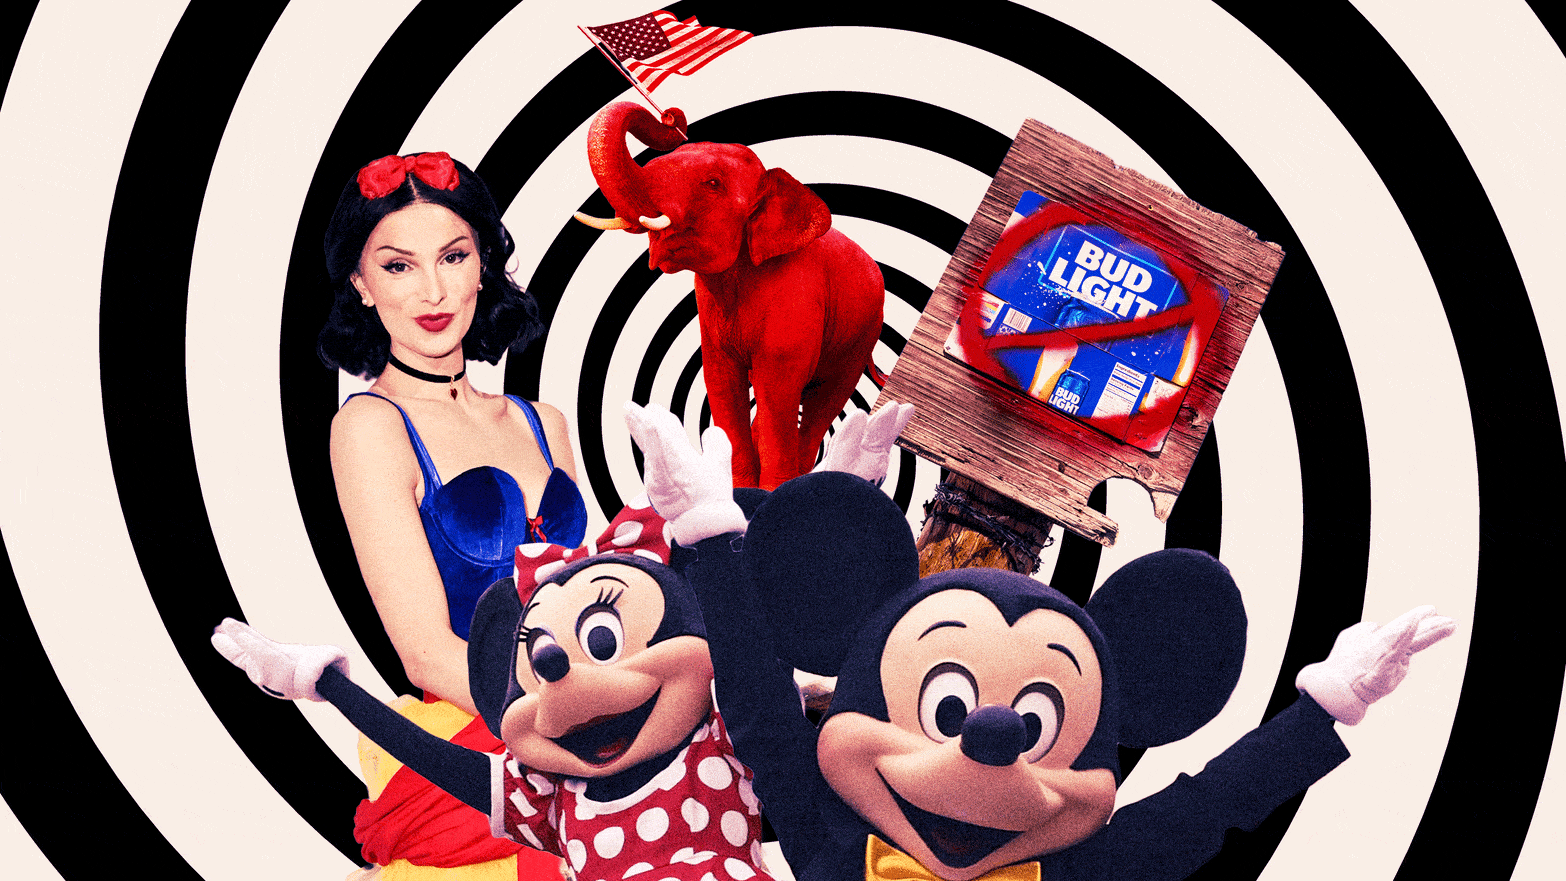 A photo illustration featuring Mickey and Minnie Mouse, Dylan Mulvaney, a sign with Bud Light crossed out, and a red elephant.